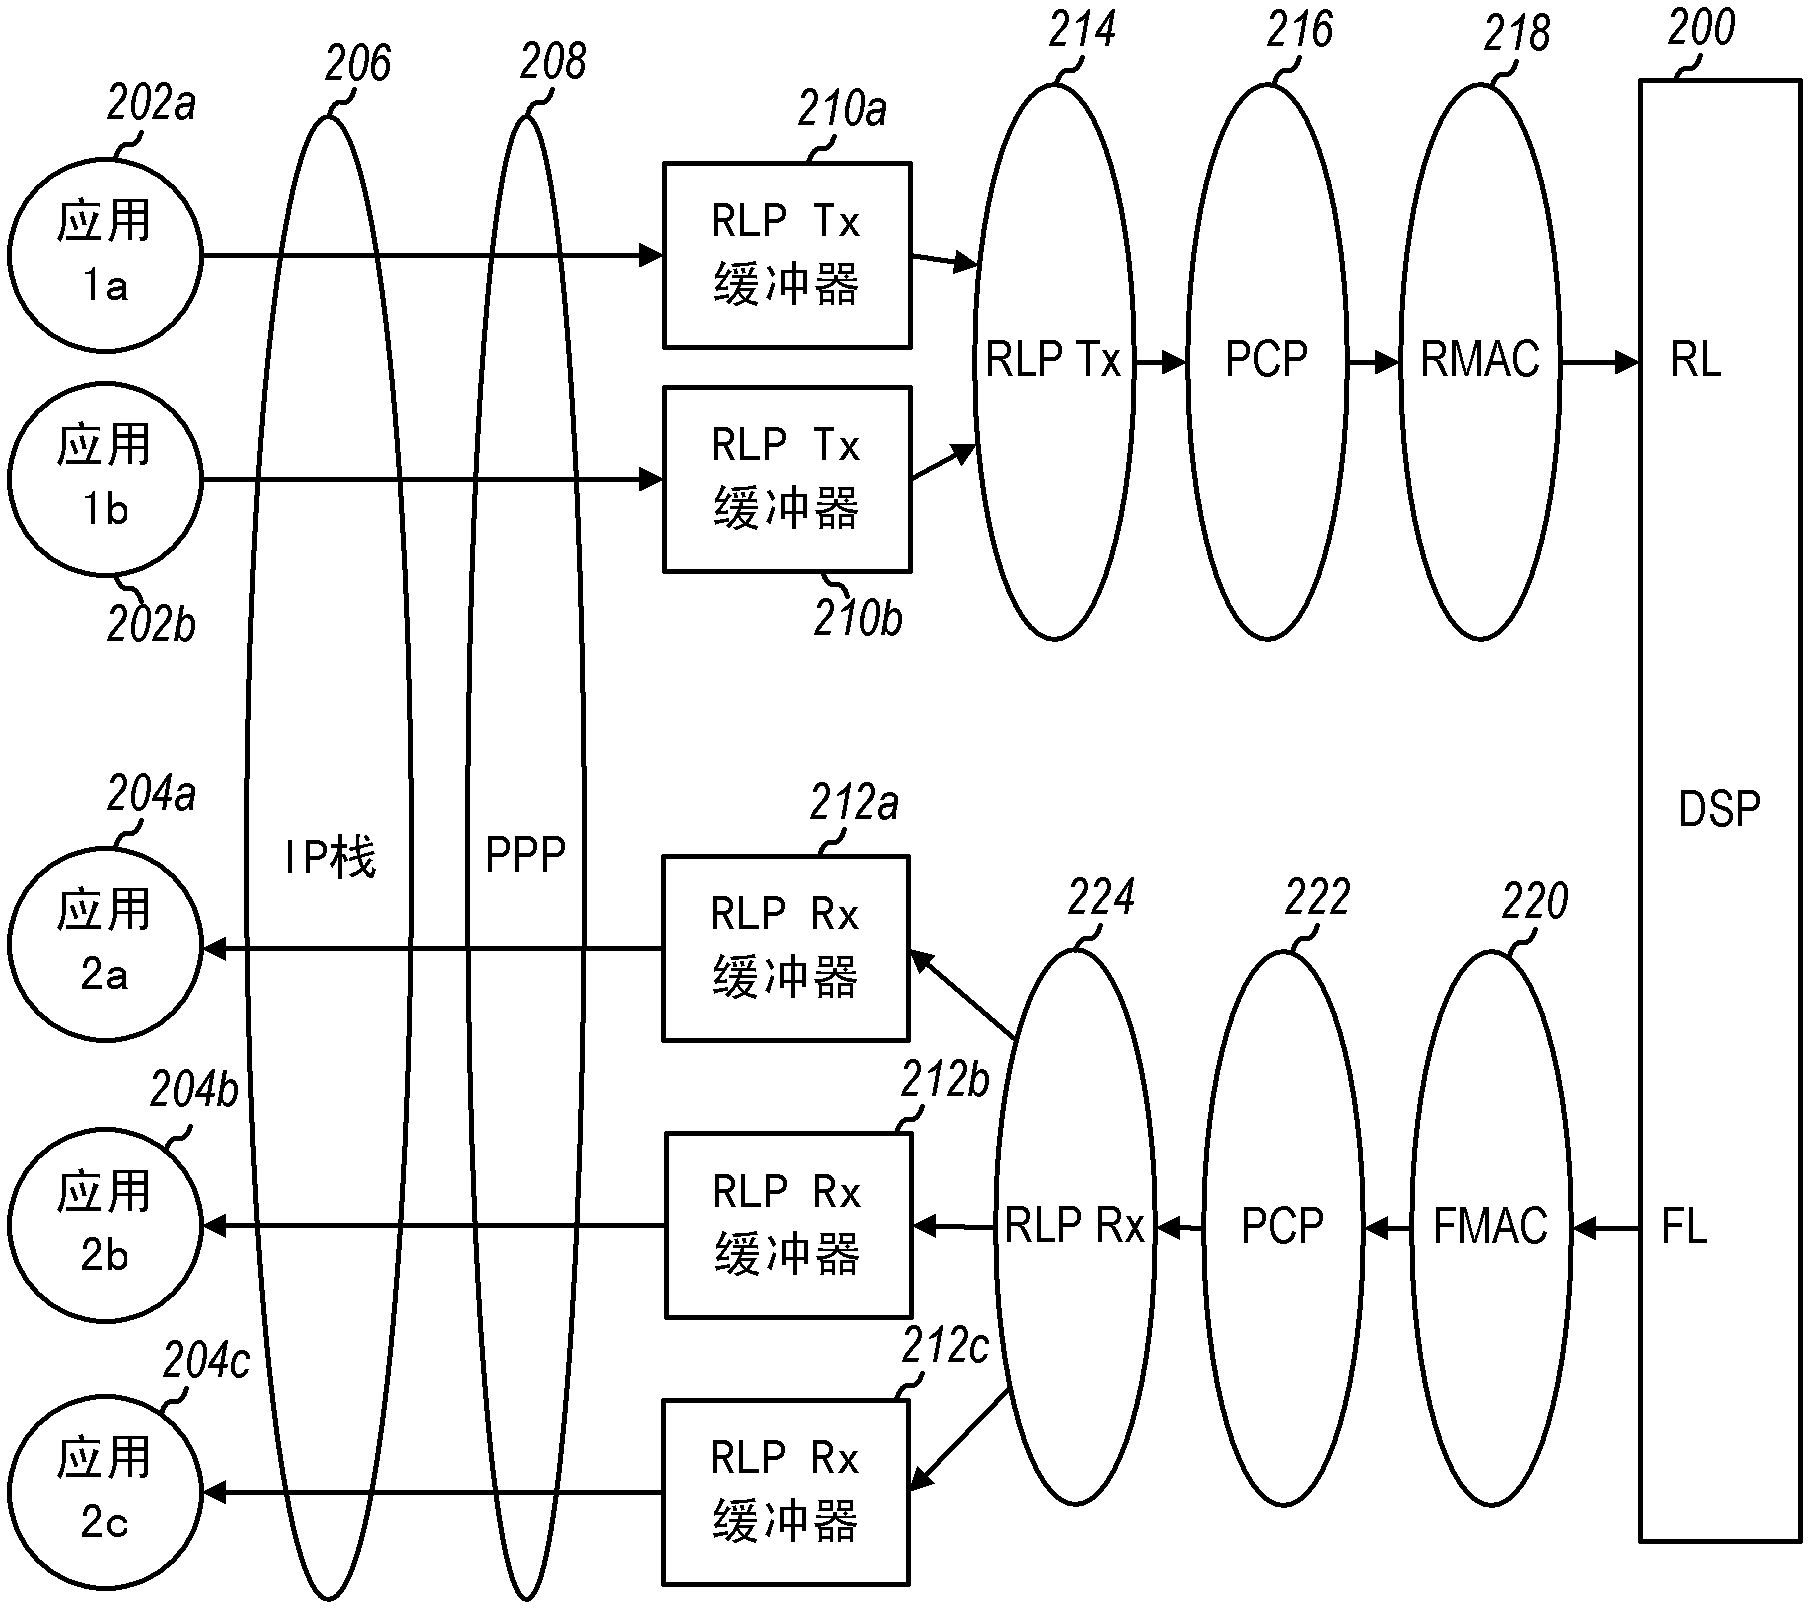 Apparatus and methods for optimizing power consumption in a wireless device